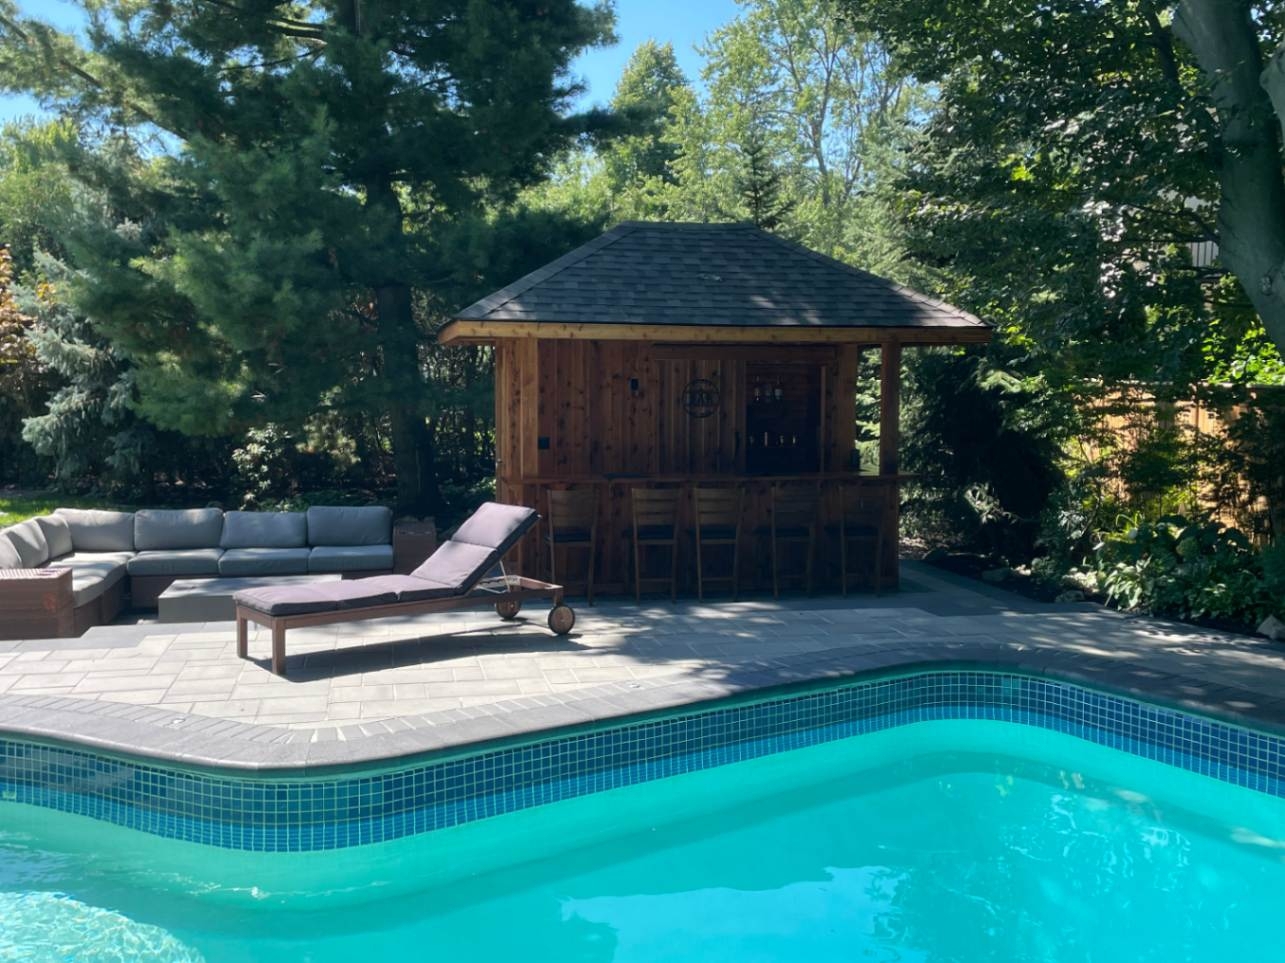 Side view of 8' x 12' Barside Pool Cabana located in Mississauga, Ontario – Summerwood Products